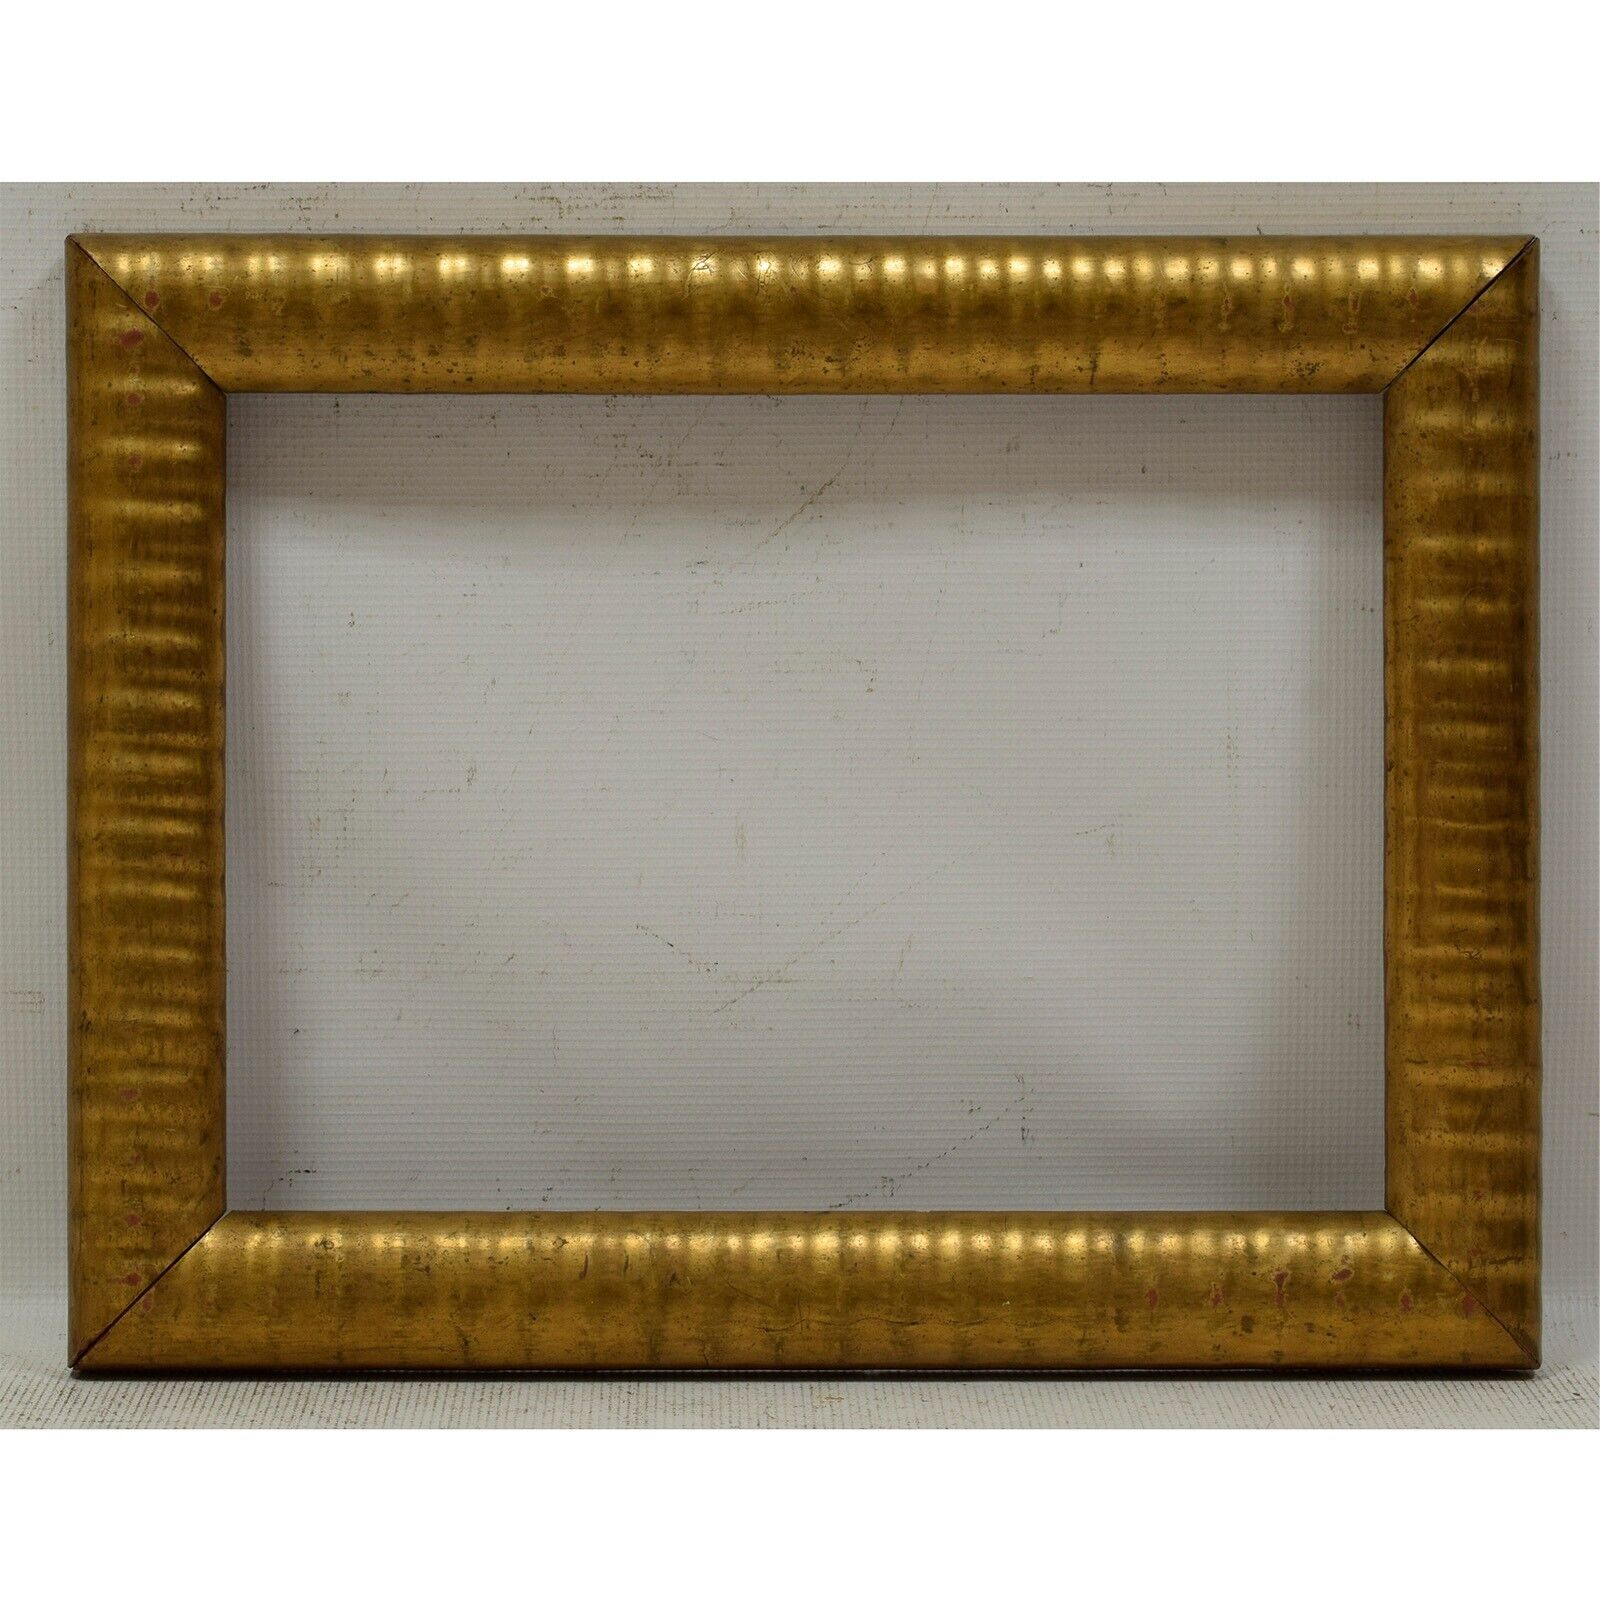 Ca 1900-1930 Old frame in original condition Internal: 14.8 x 10.6 in